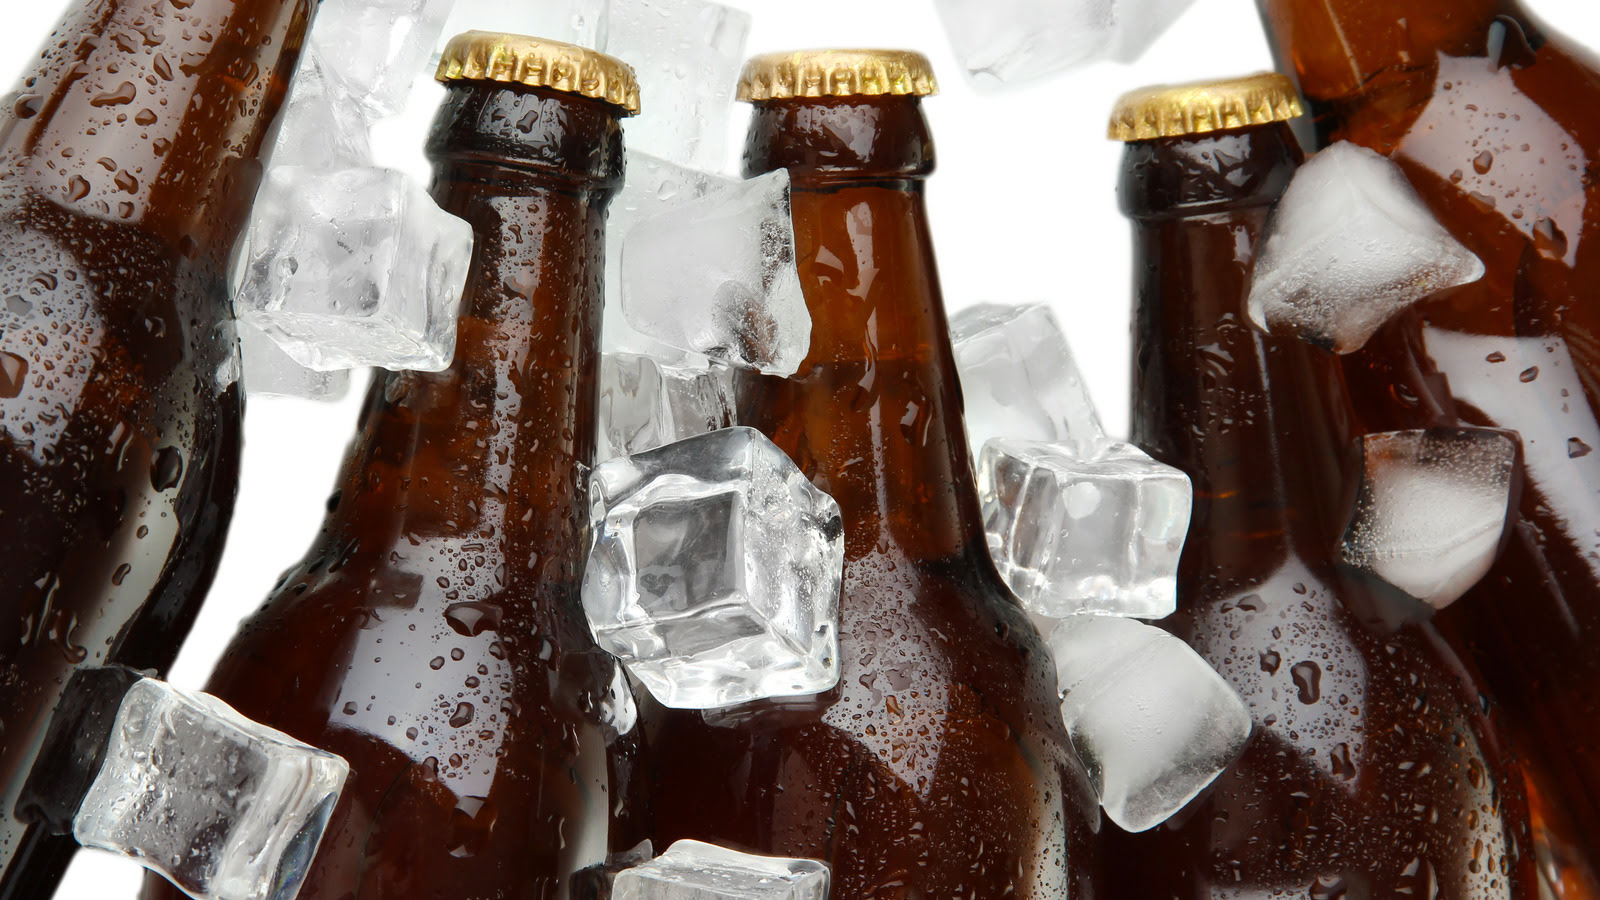 How Long To Leave Beer In Freezer